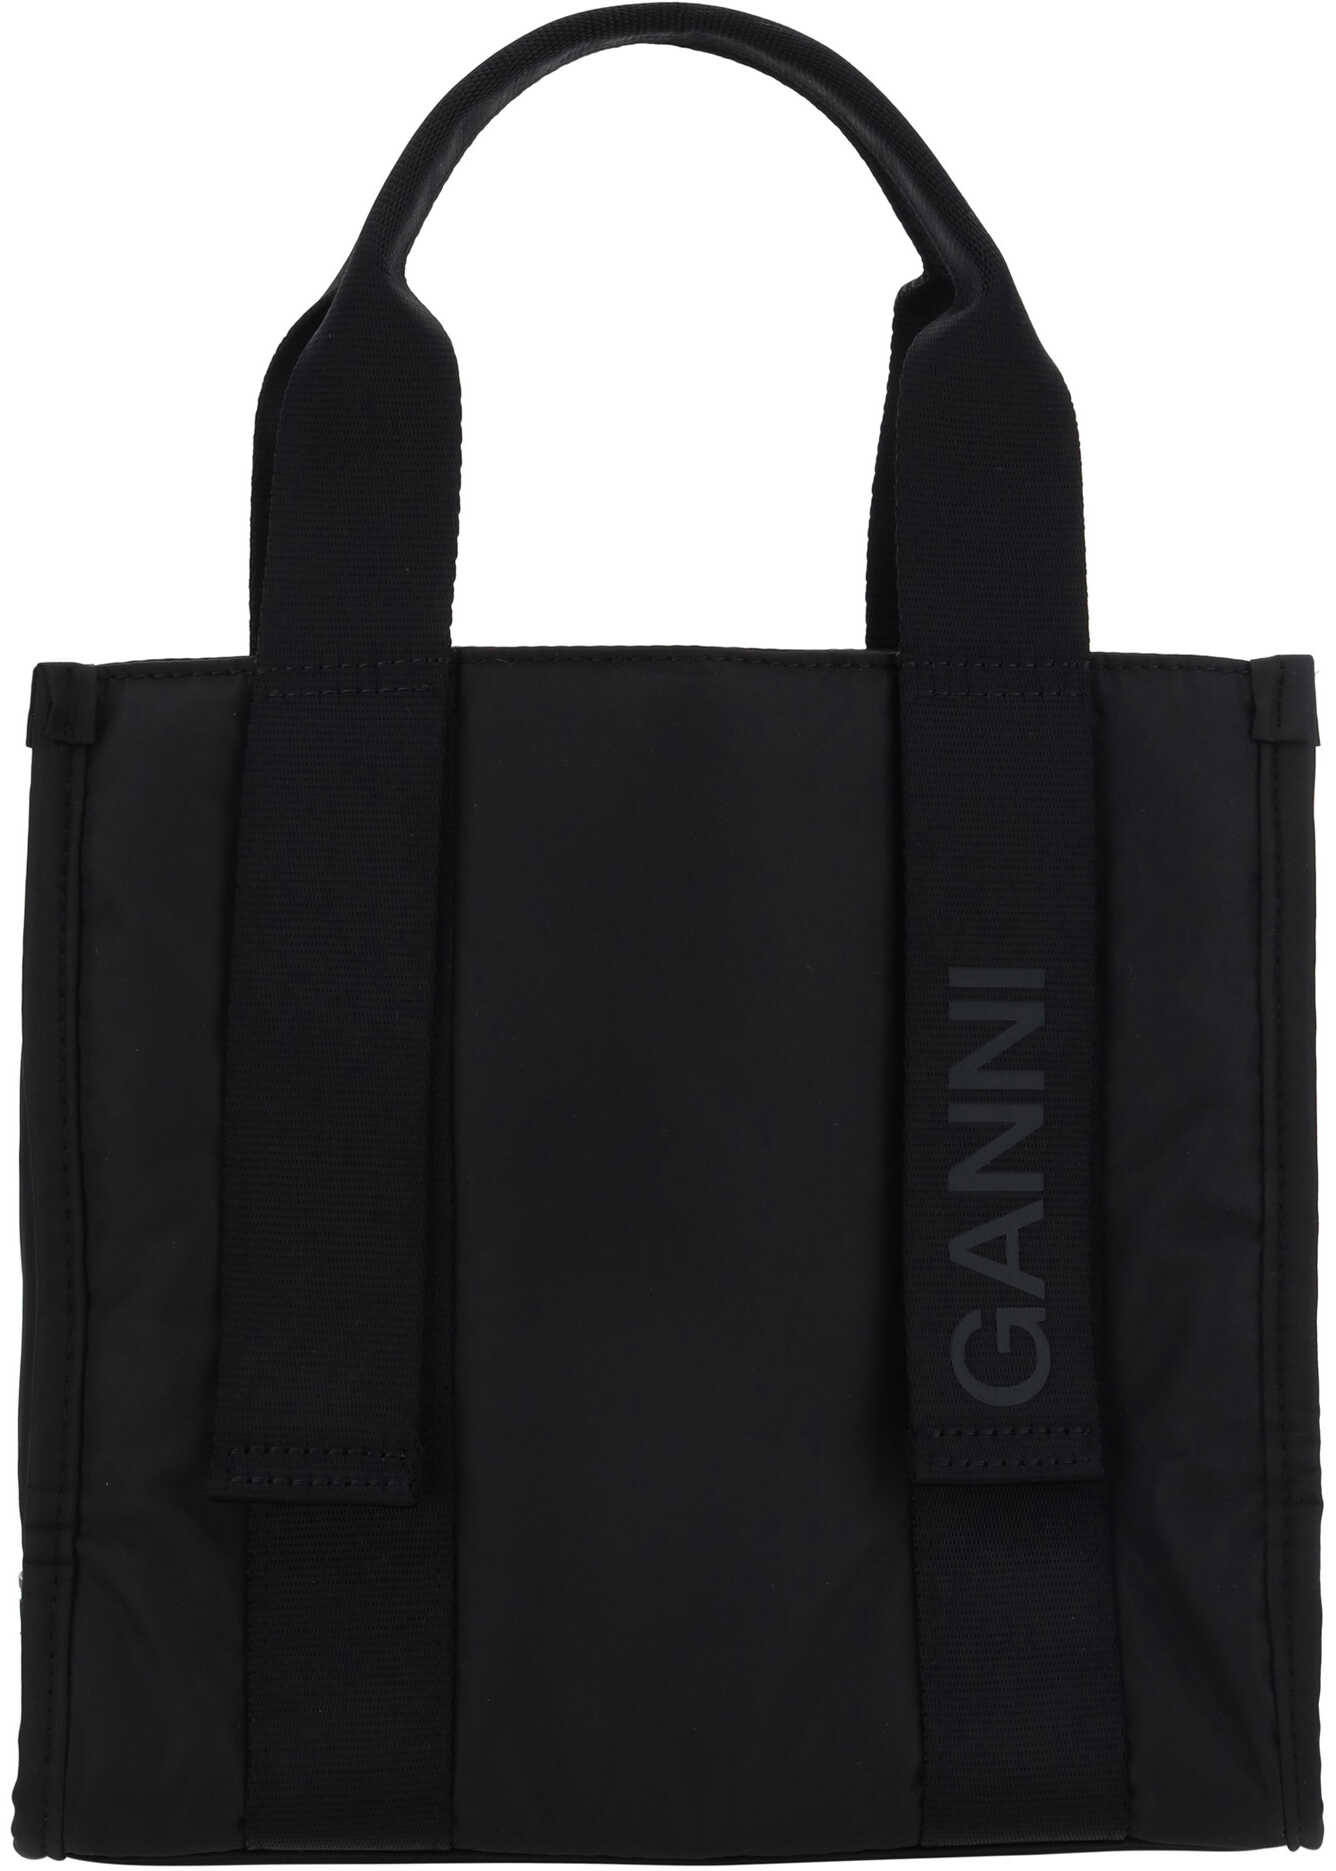 Ganni Recycled Tech Tote Bag BLACK image4